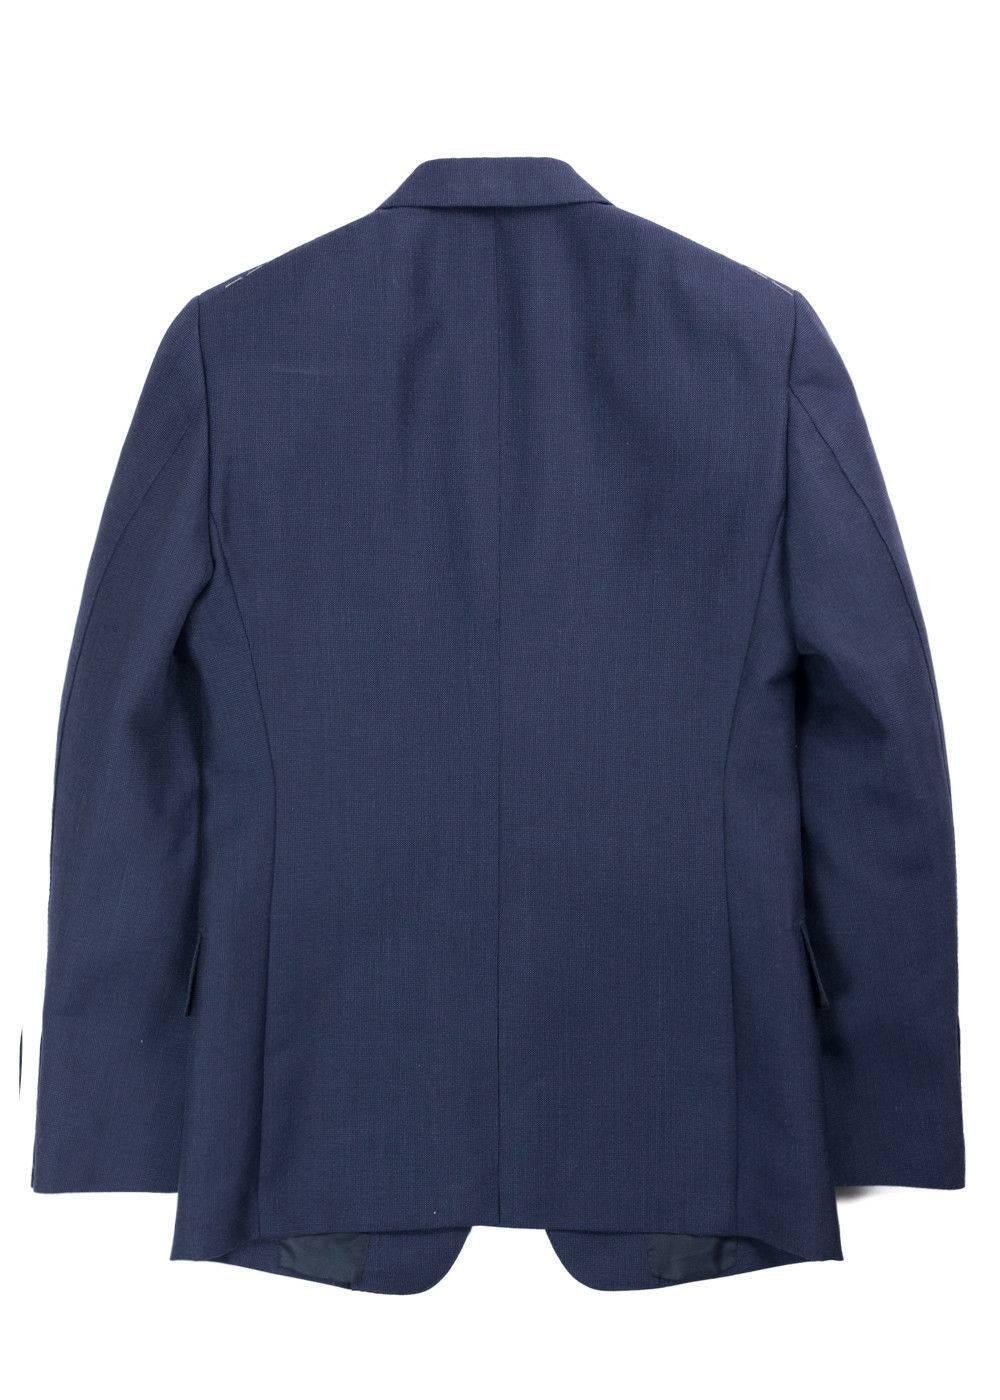 Brand New Tom Ford O'Conner Jacket
Original Tags & Hanger Included
Retails in Stores & Online for $3880
Size EUR 48R / US 38 Fits True to Size

Lend a hint of effortless sophistication to your formal repertoire courtesy of Tom Ford's Windsor suit.